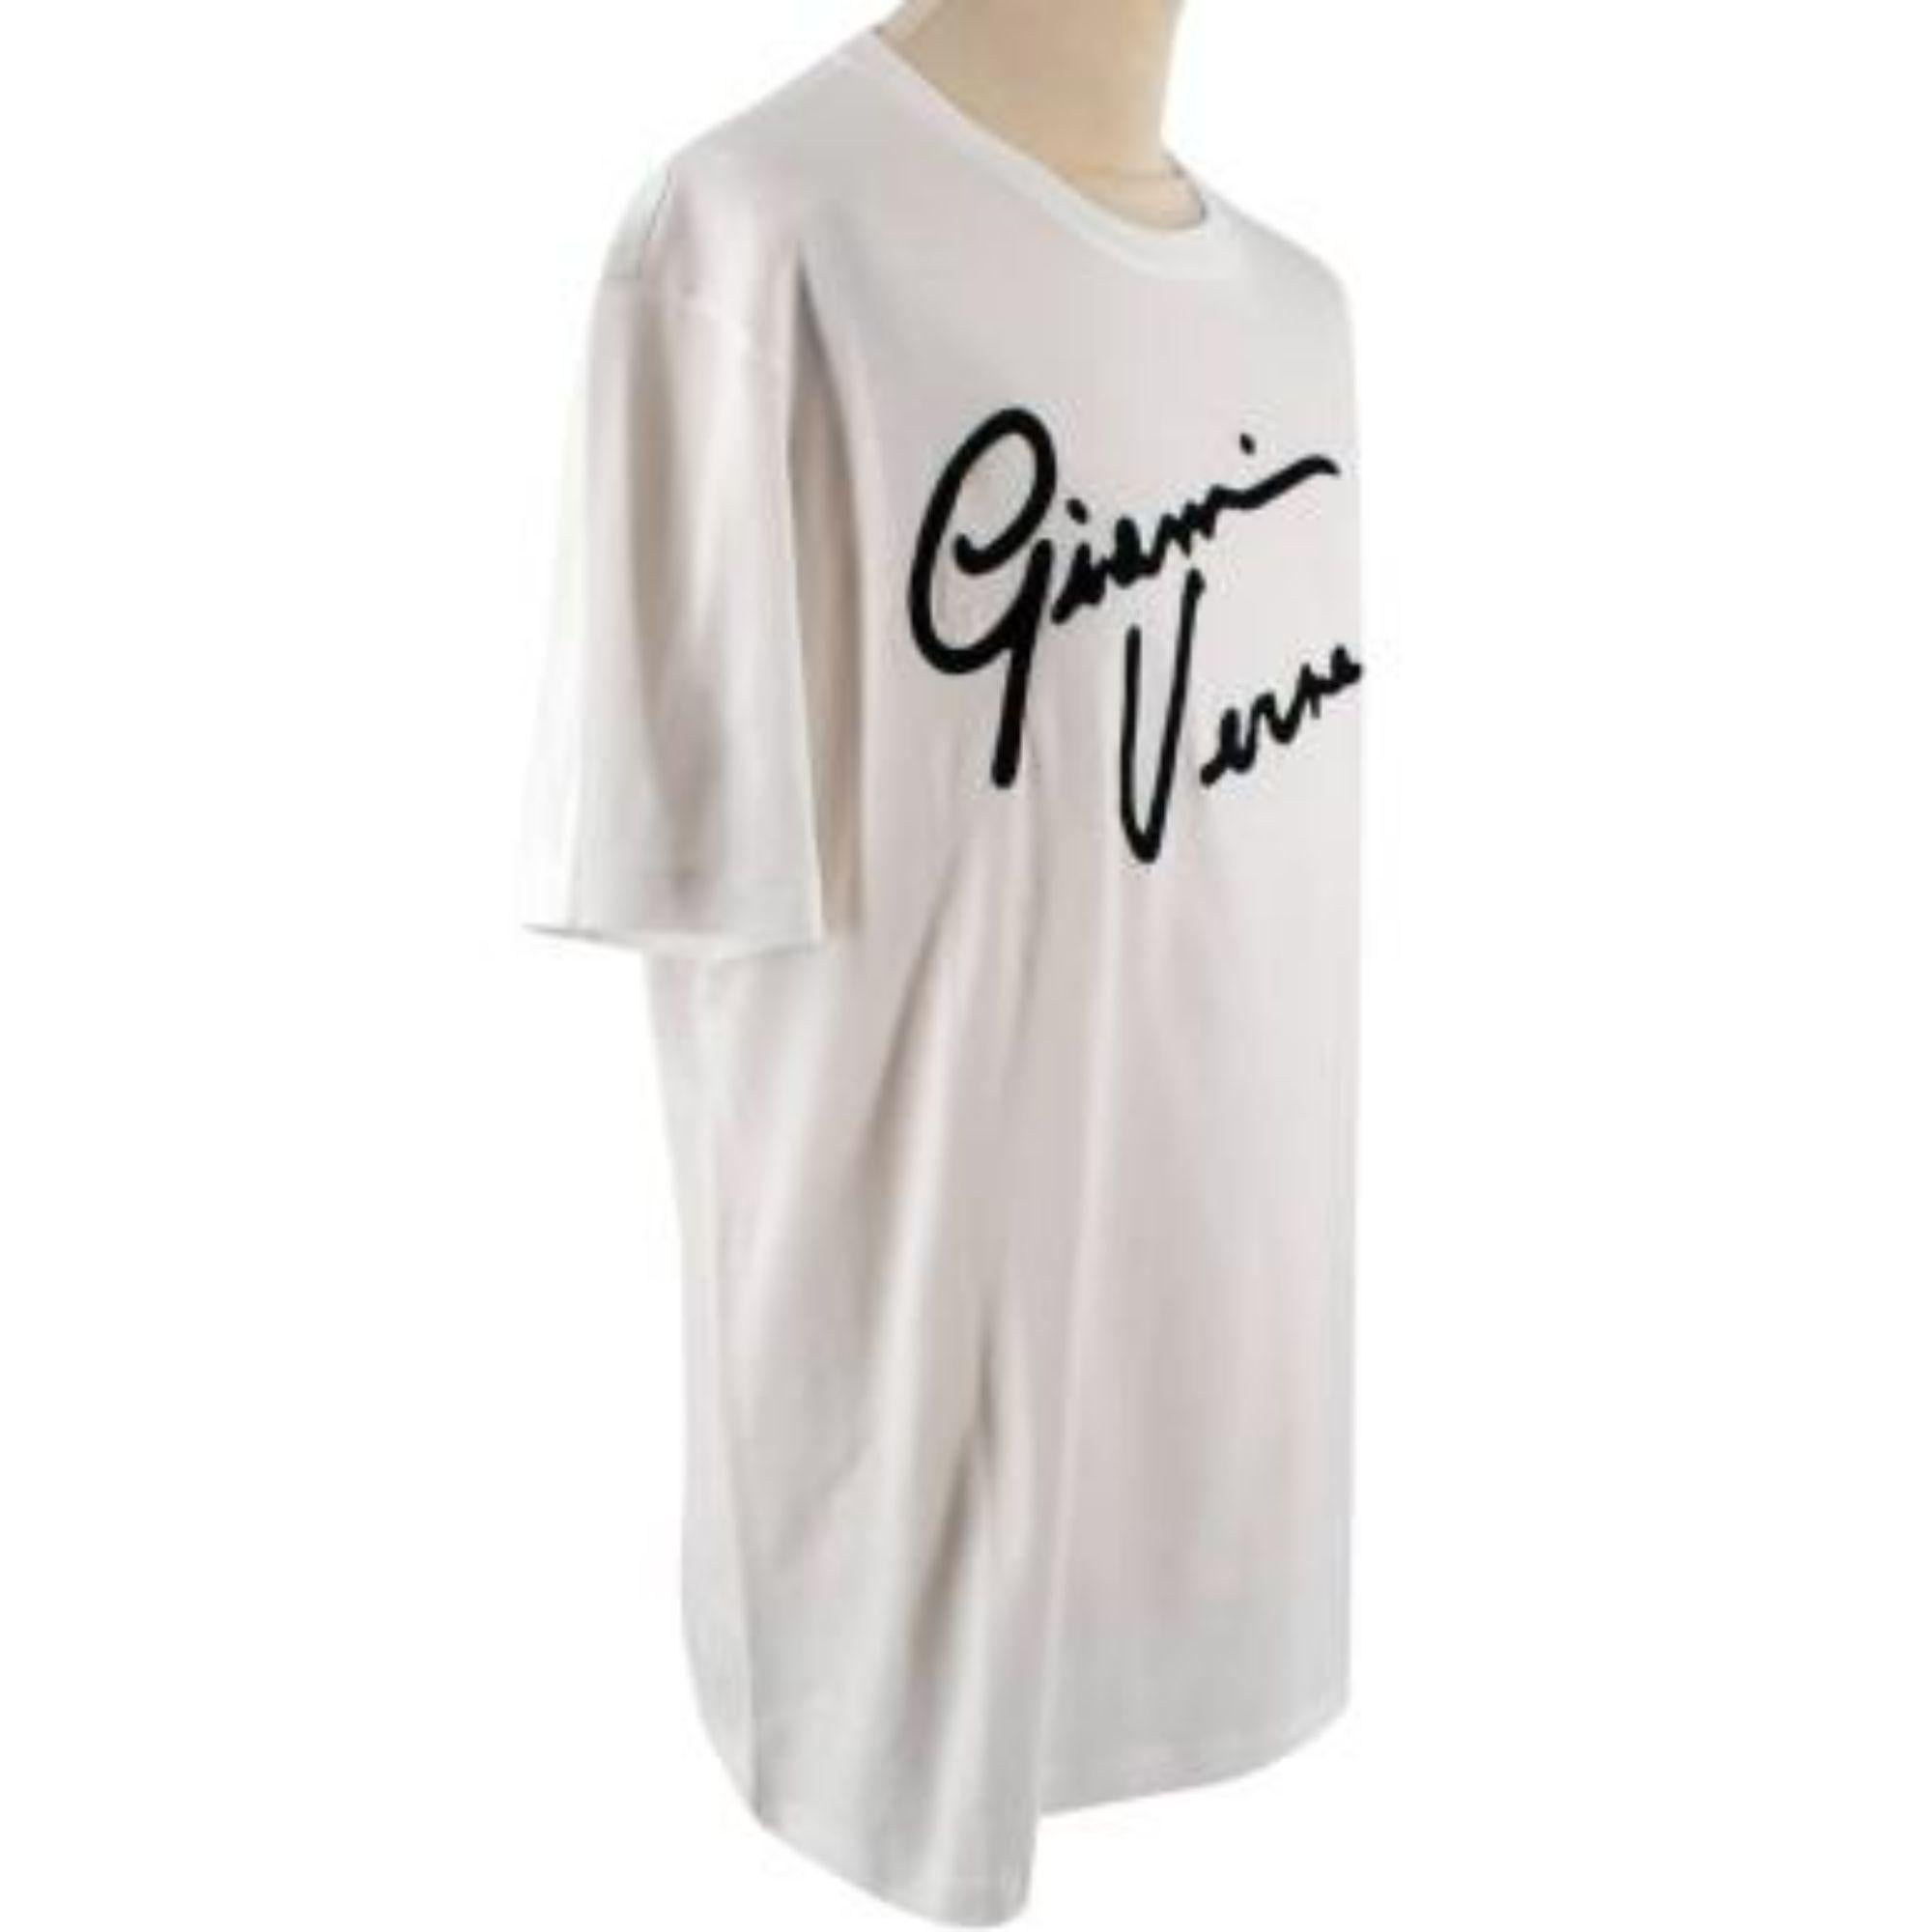 Versace White and Black Gianni Logo T-shirt In Excellent Condition For Sale In London, GB